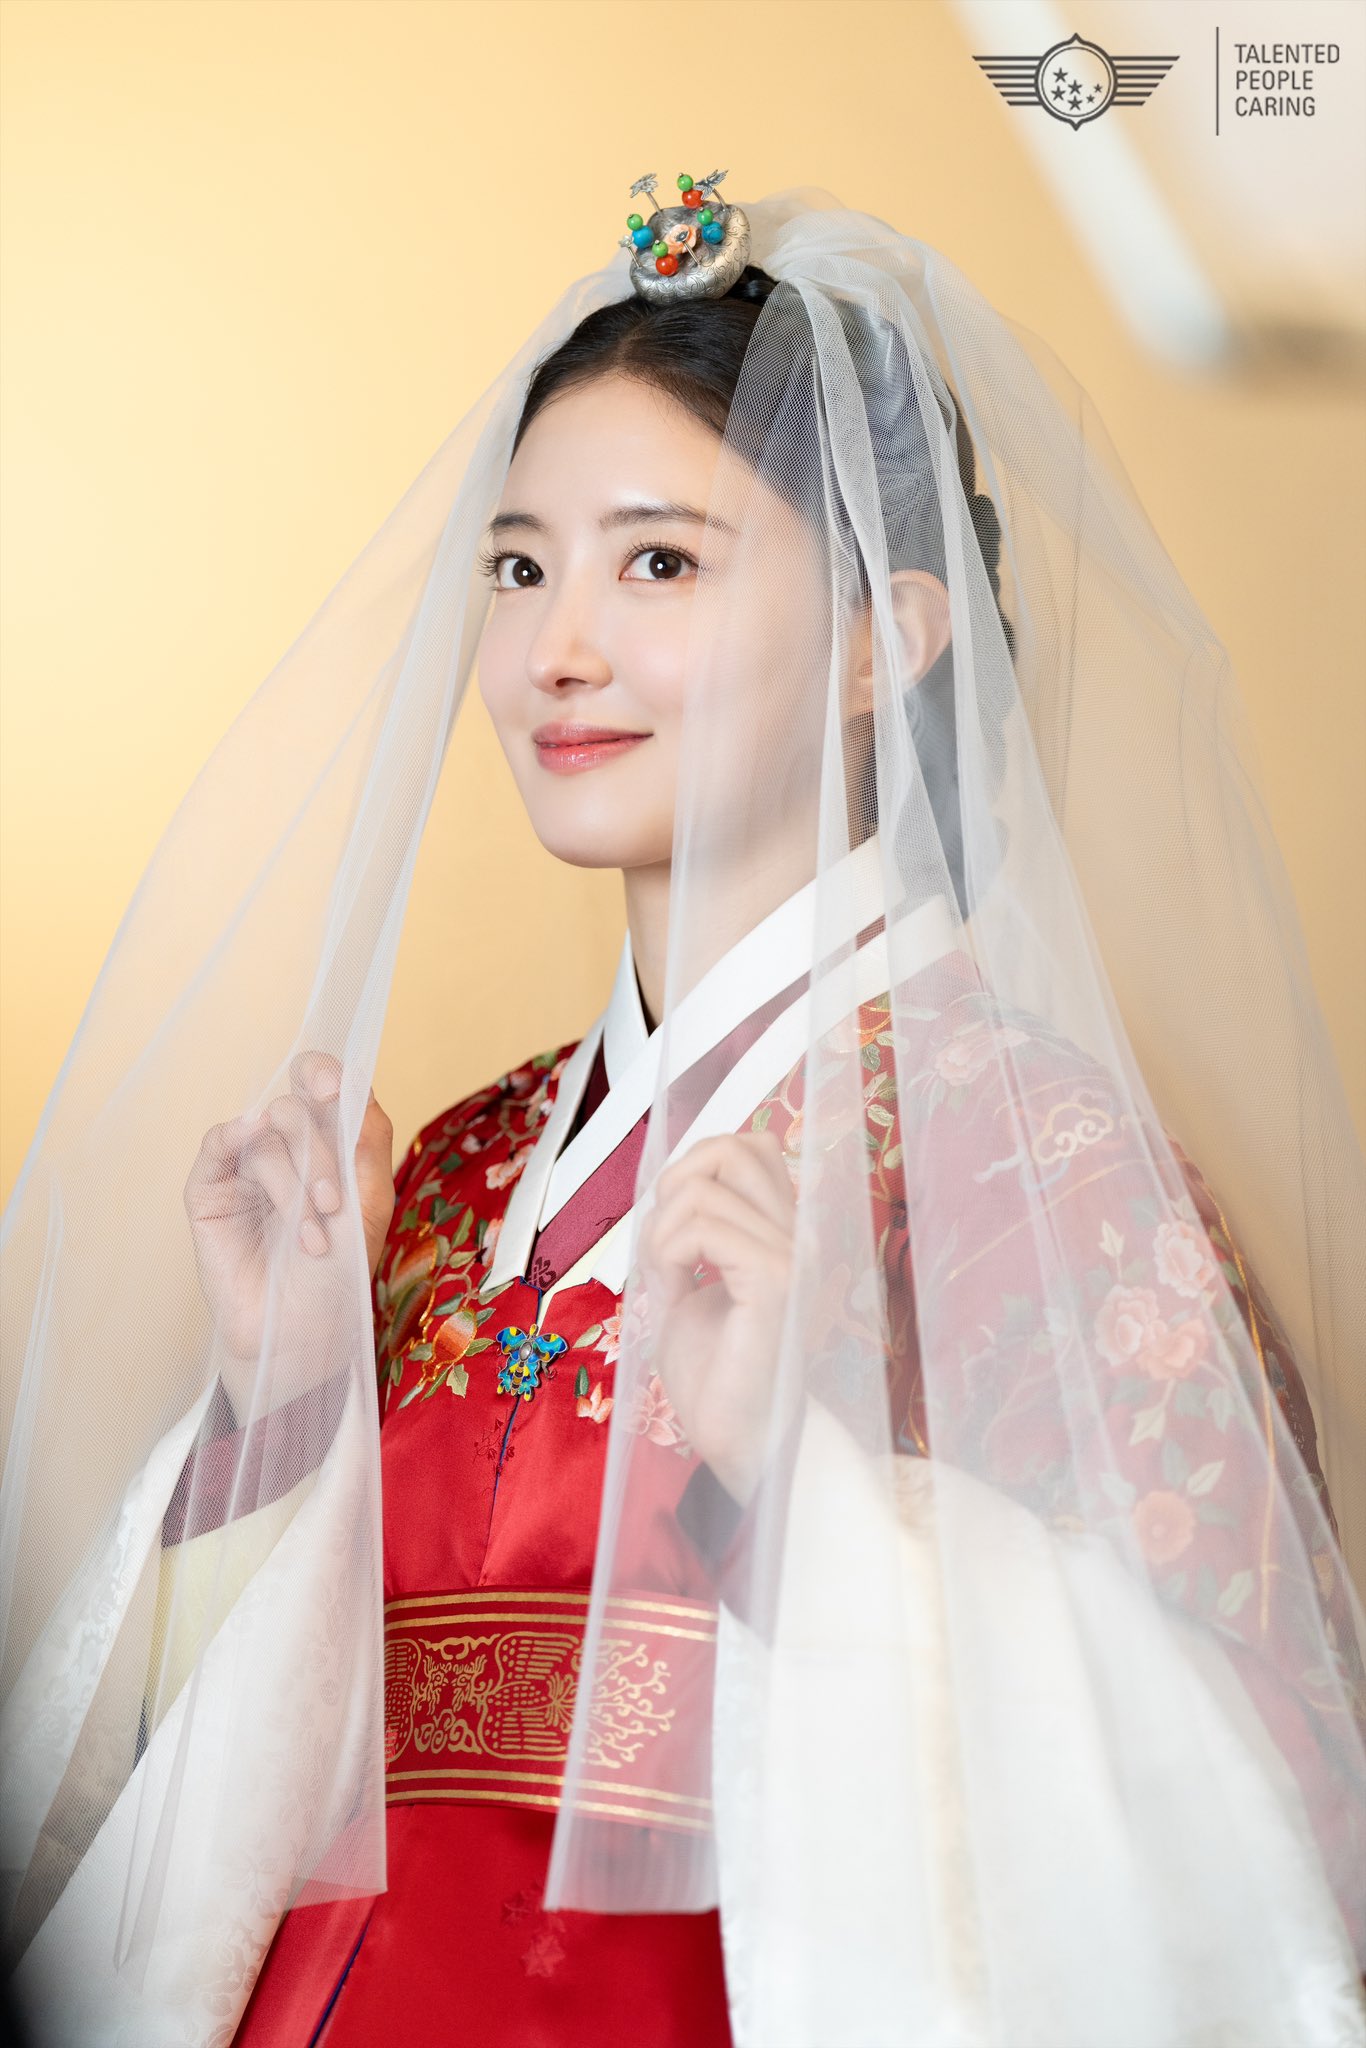 An actress who is perfect for historical dramas these days